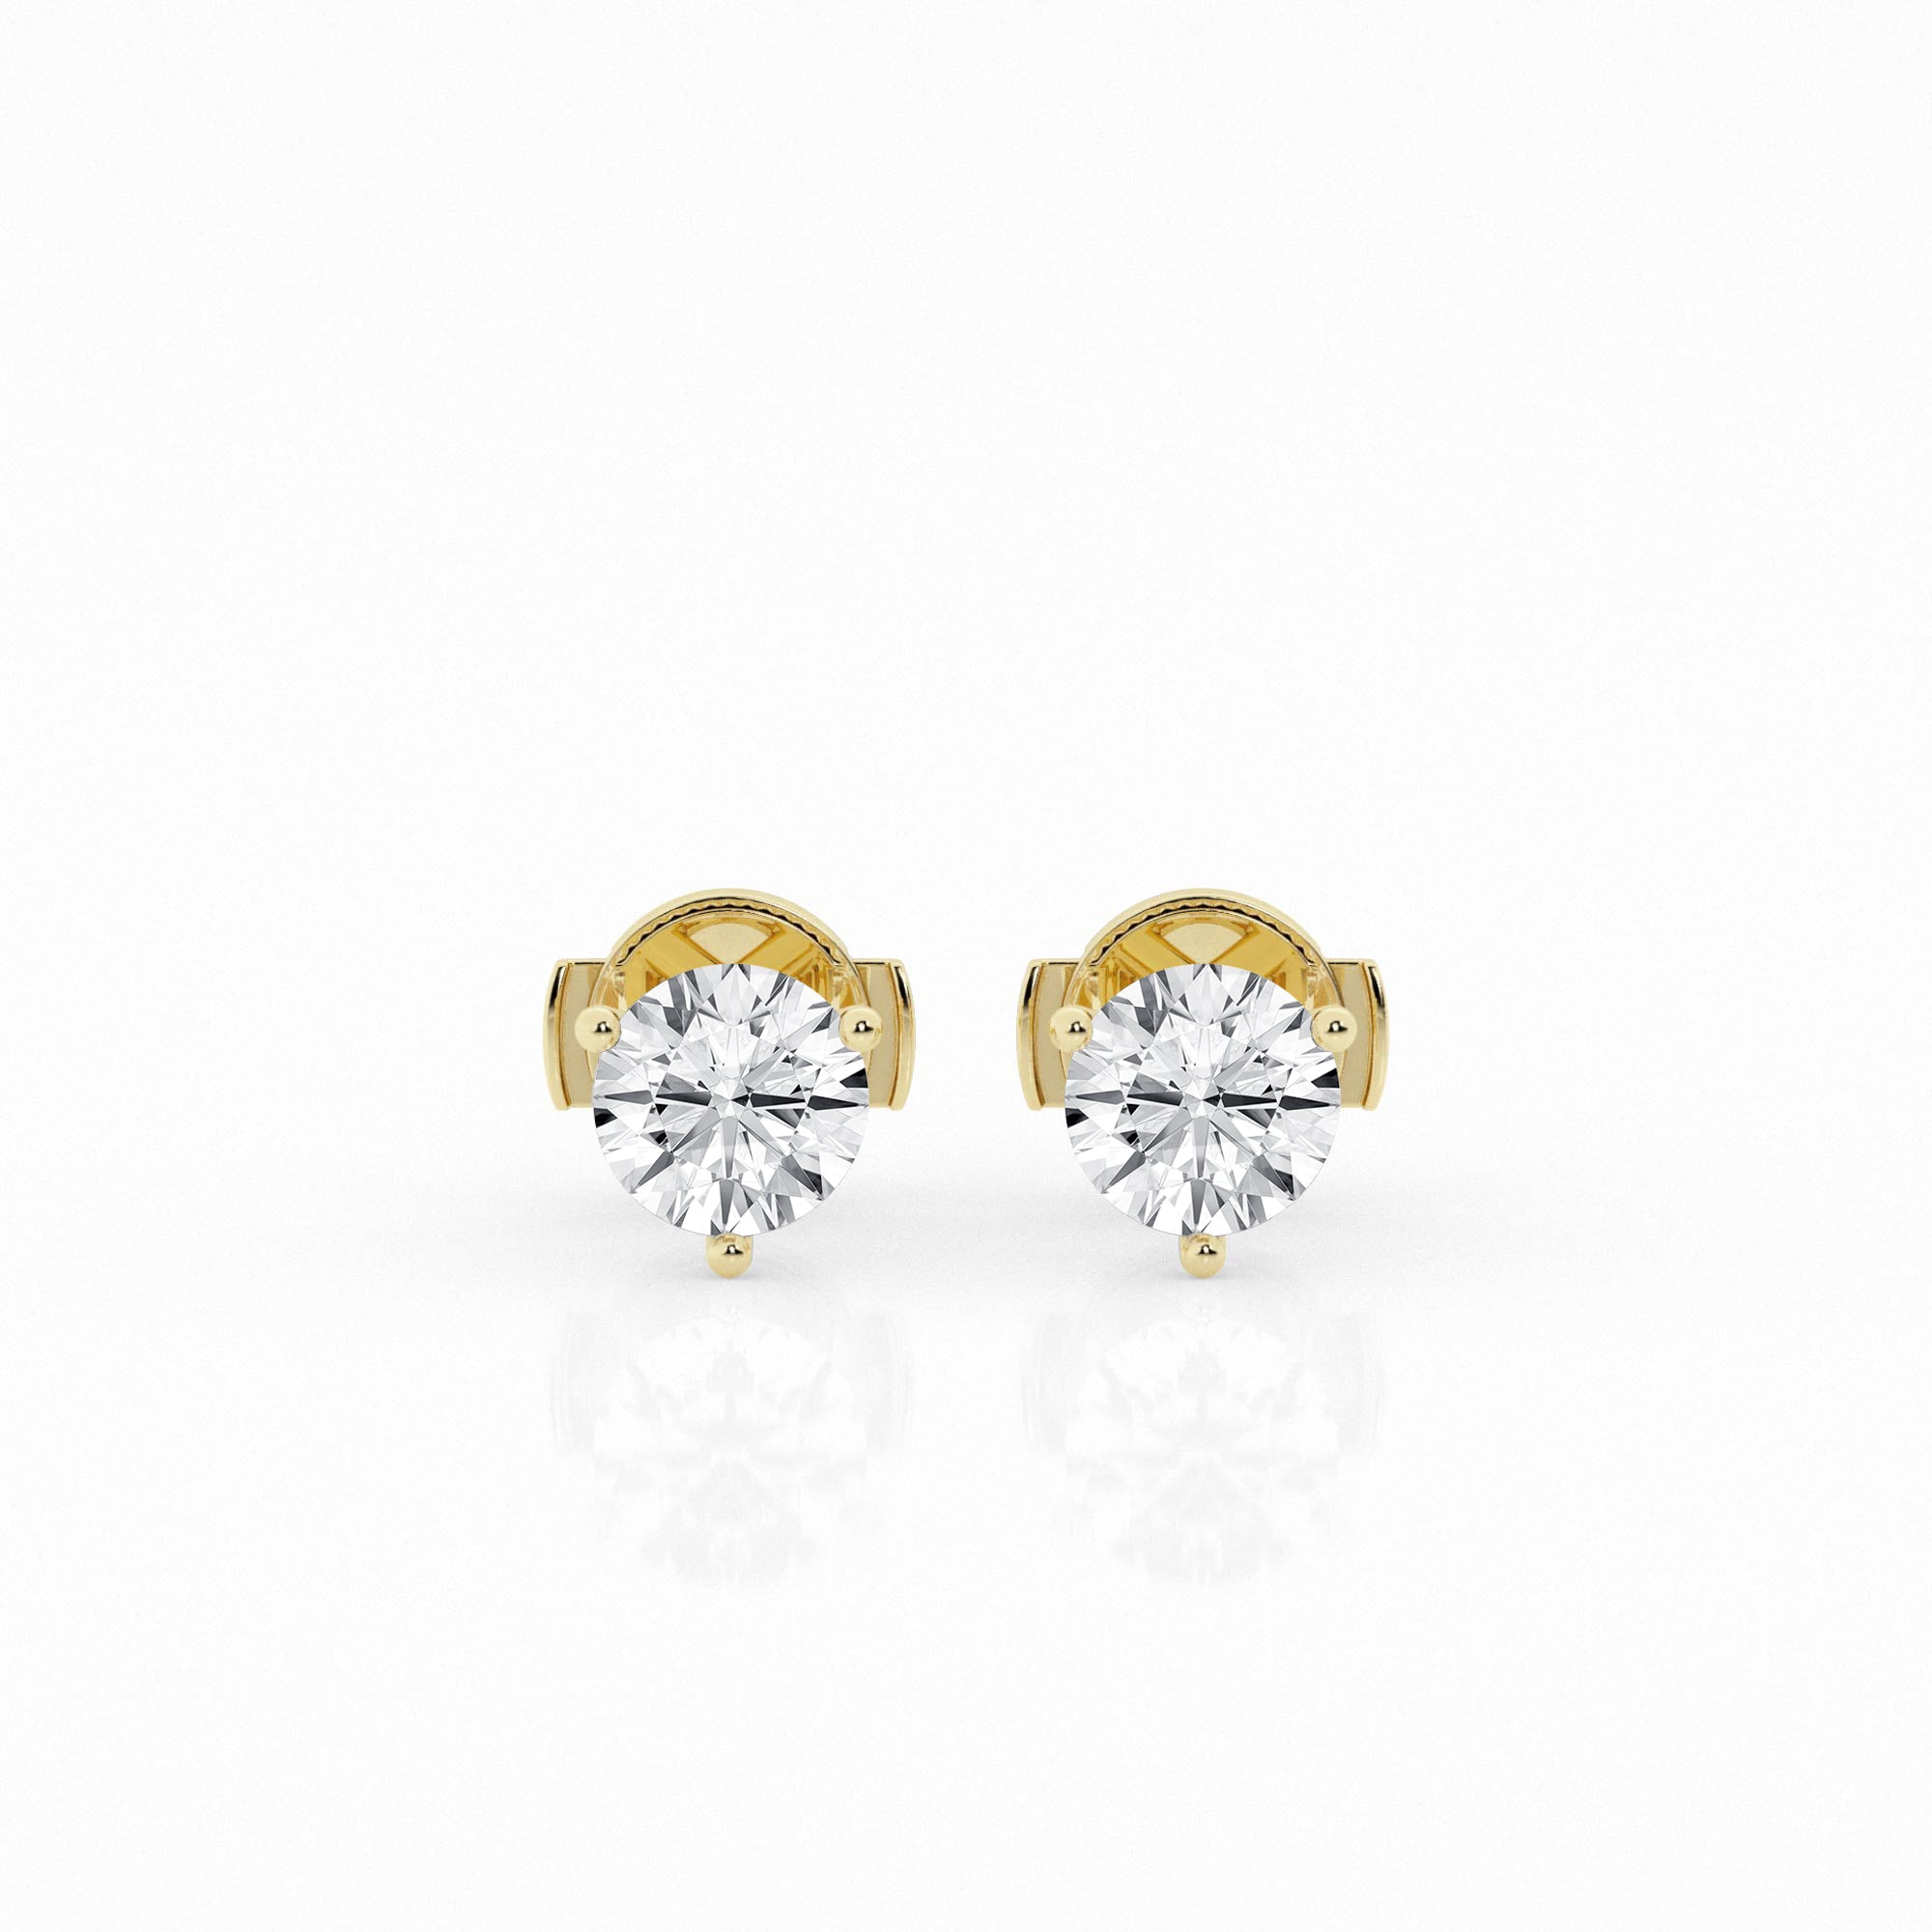 Yellow gold stud earrings adorned with 1.5 carat lab-grown round diamonds